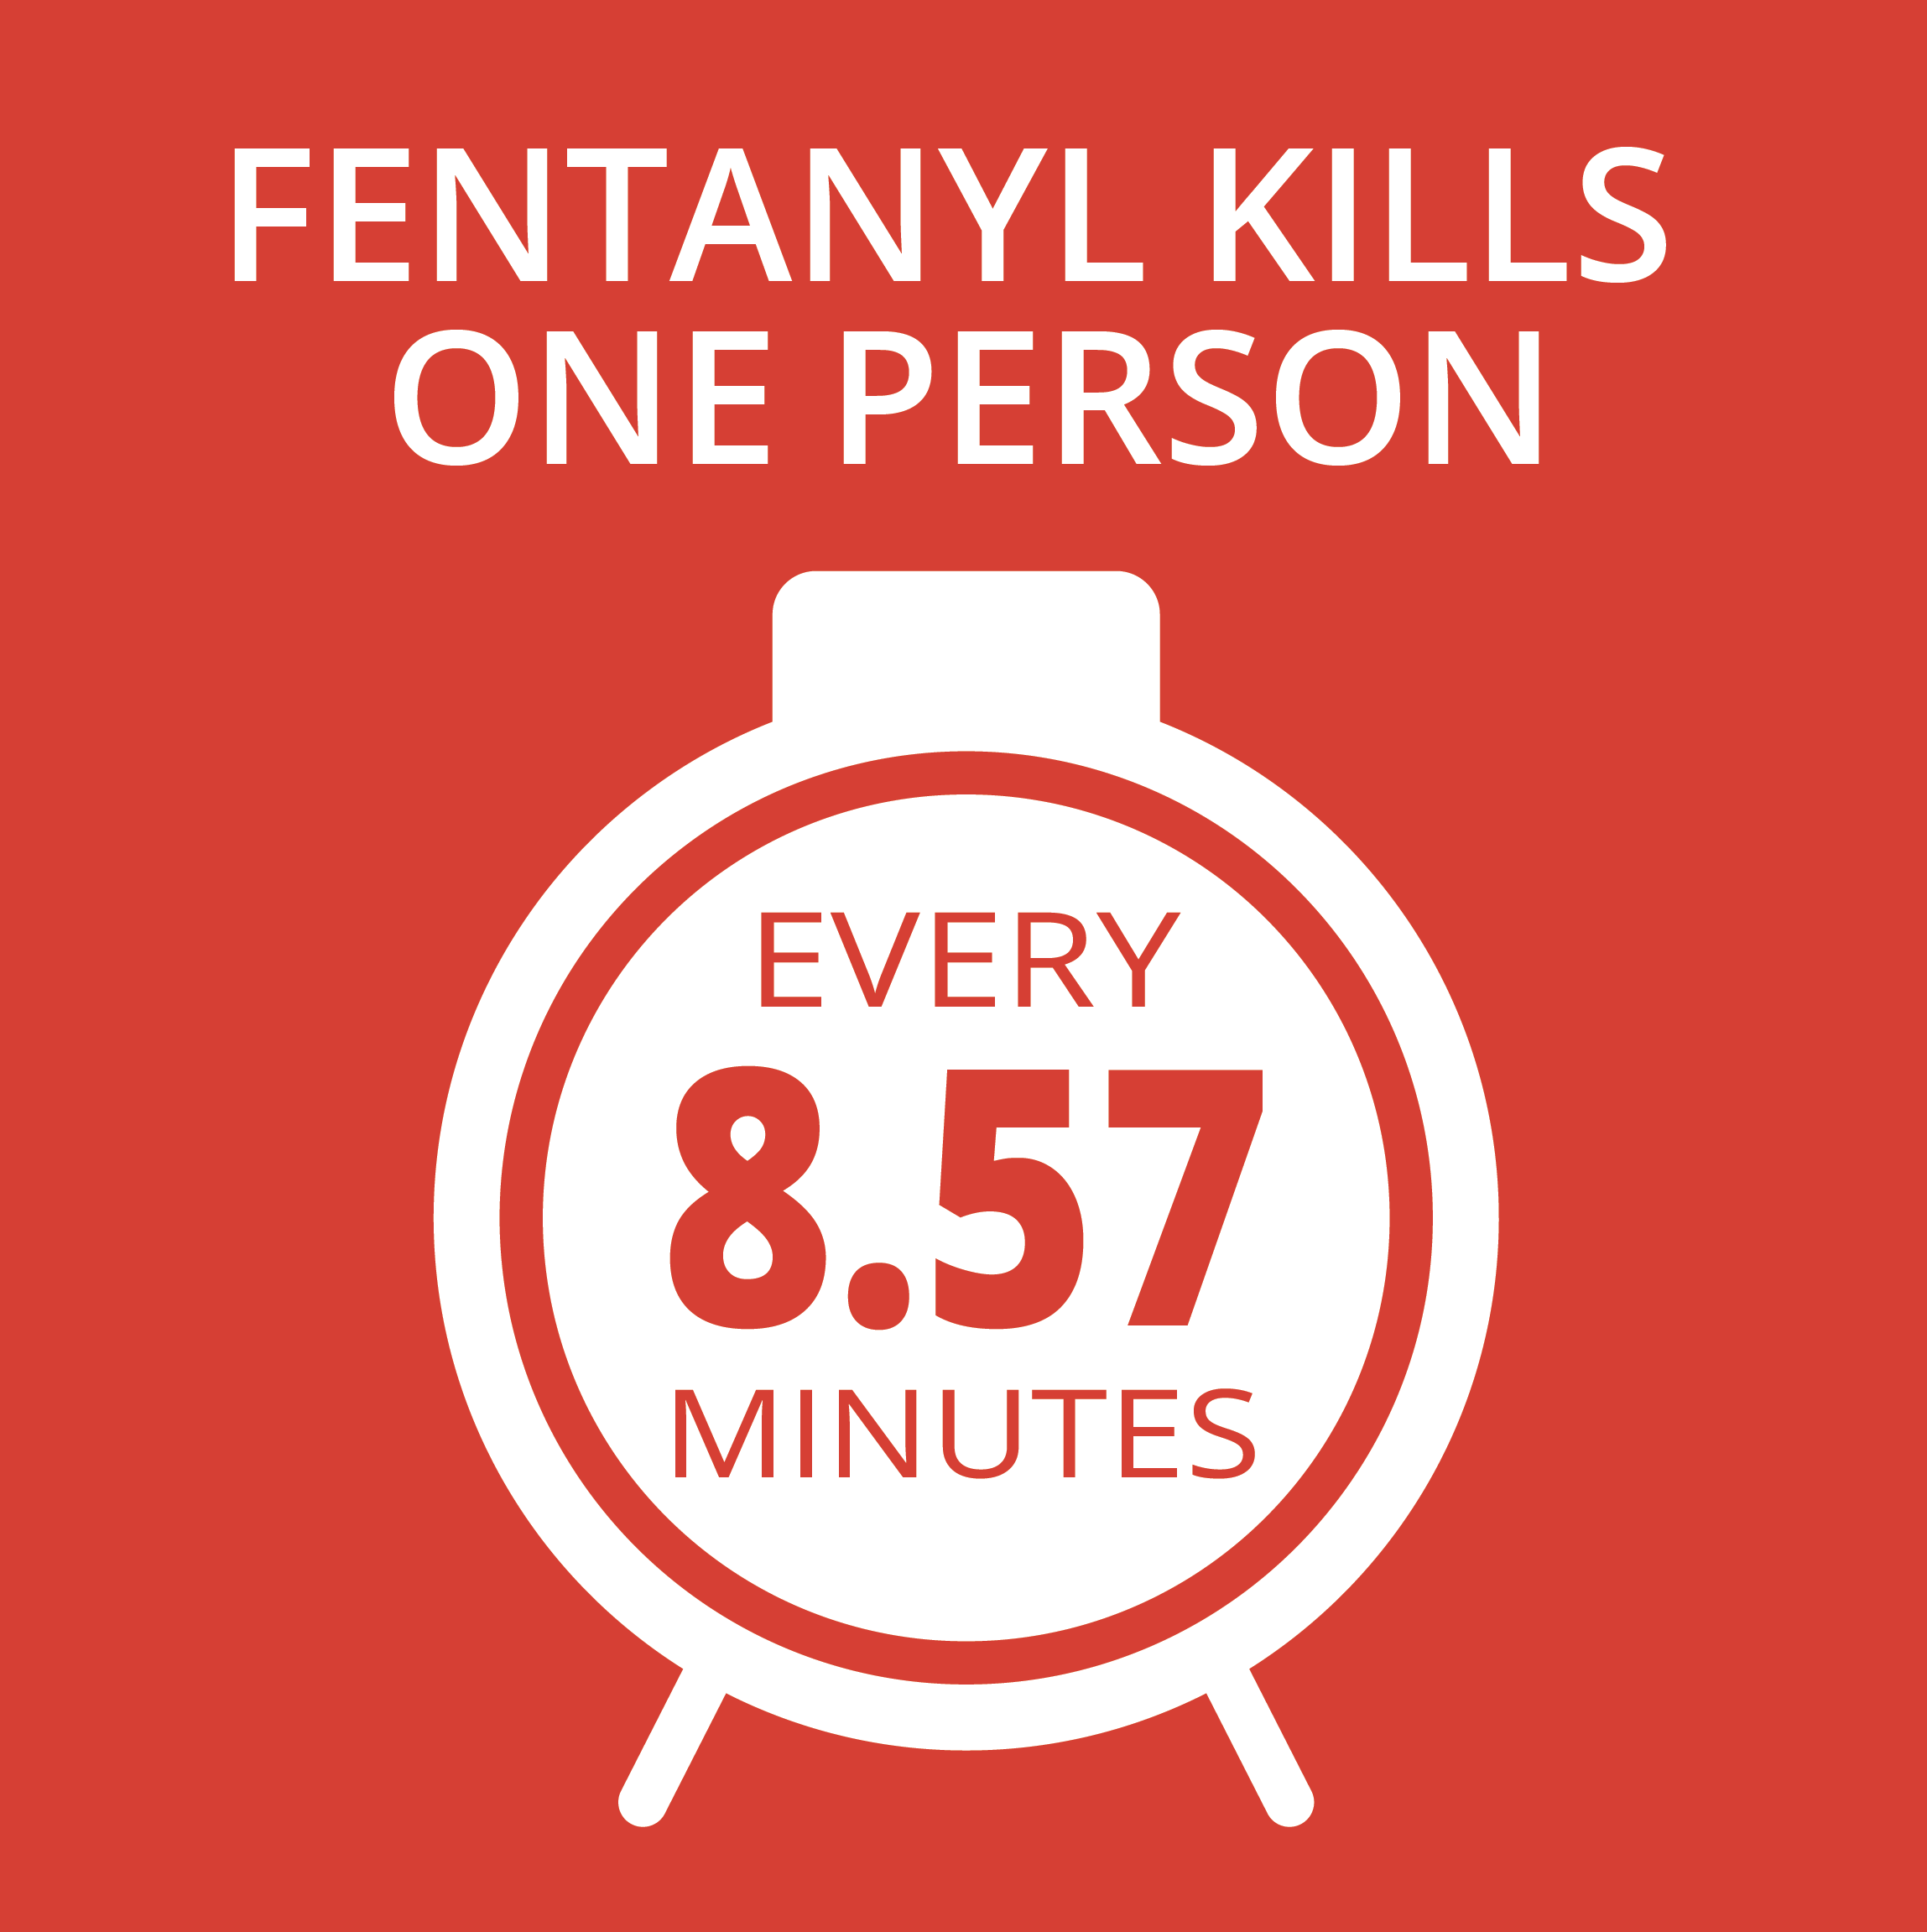 fentanyl kills one person every 8.57 minutes